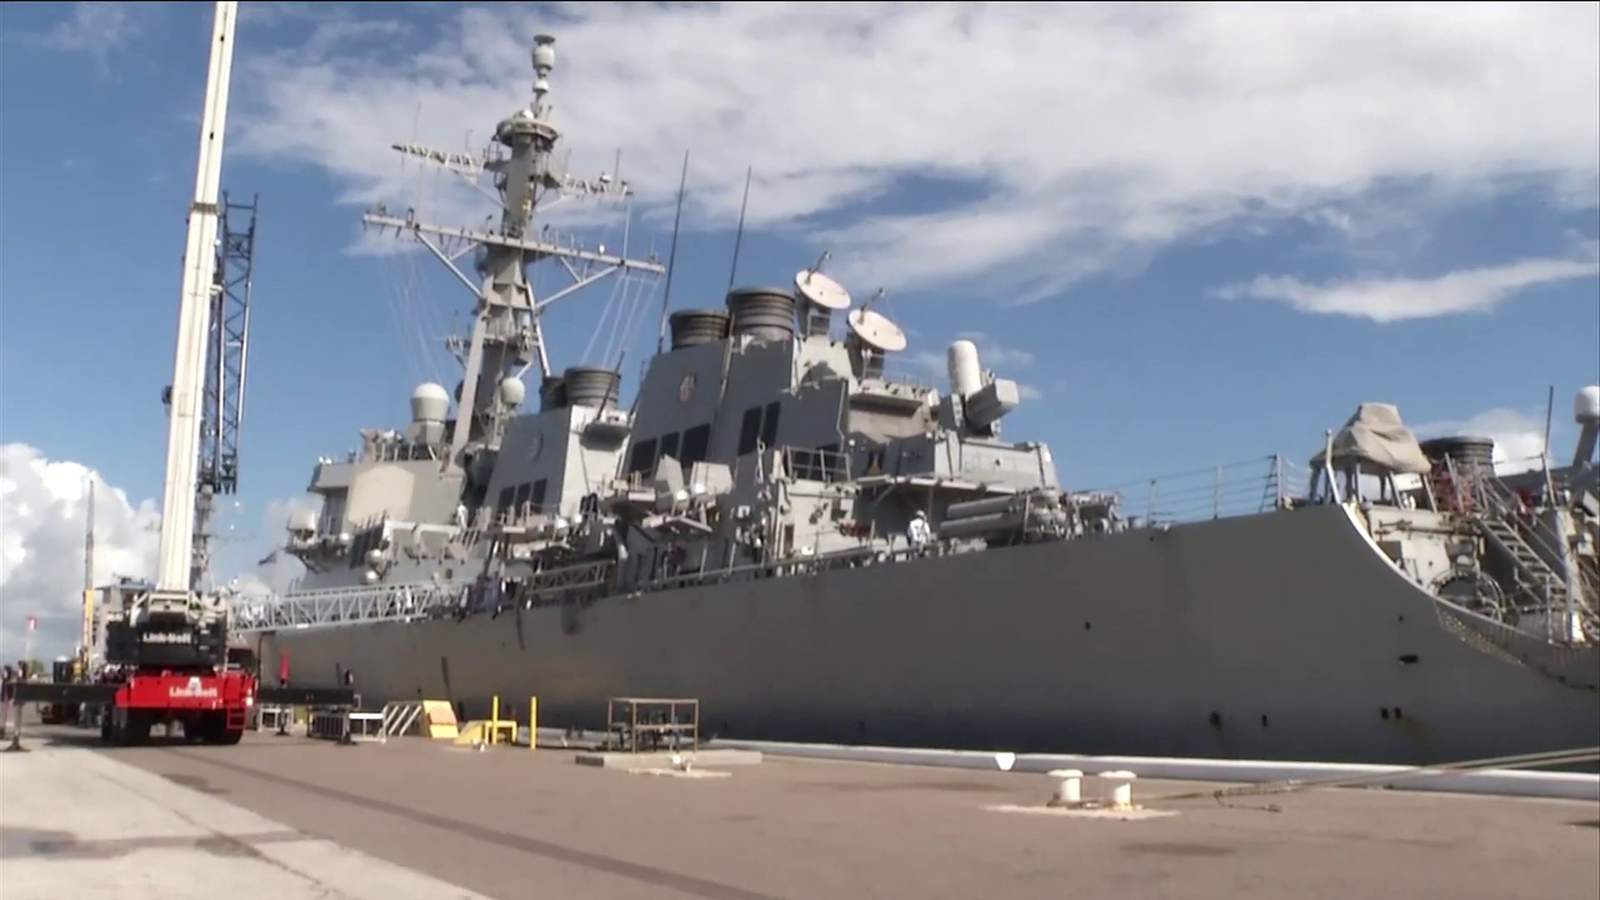 USS Carney arrives at Naval Station Mayport after spending 5 years abroad